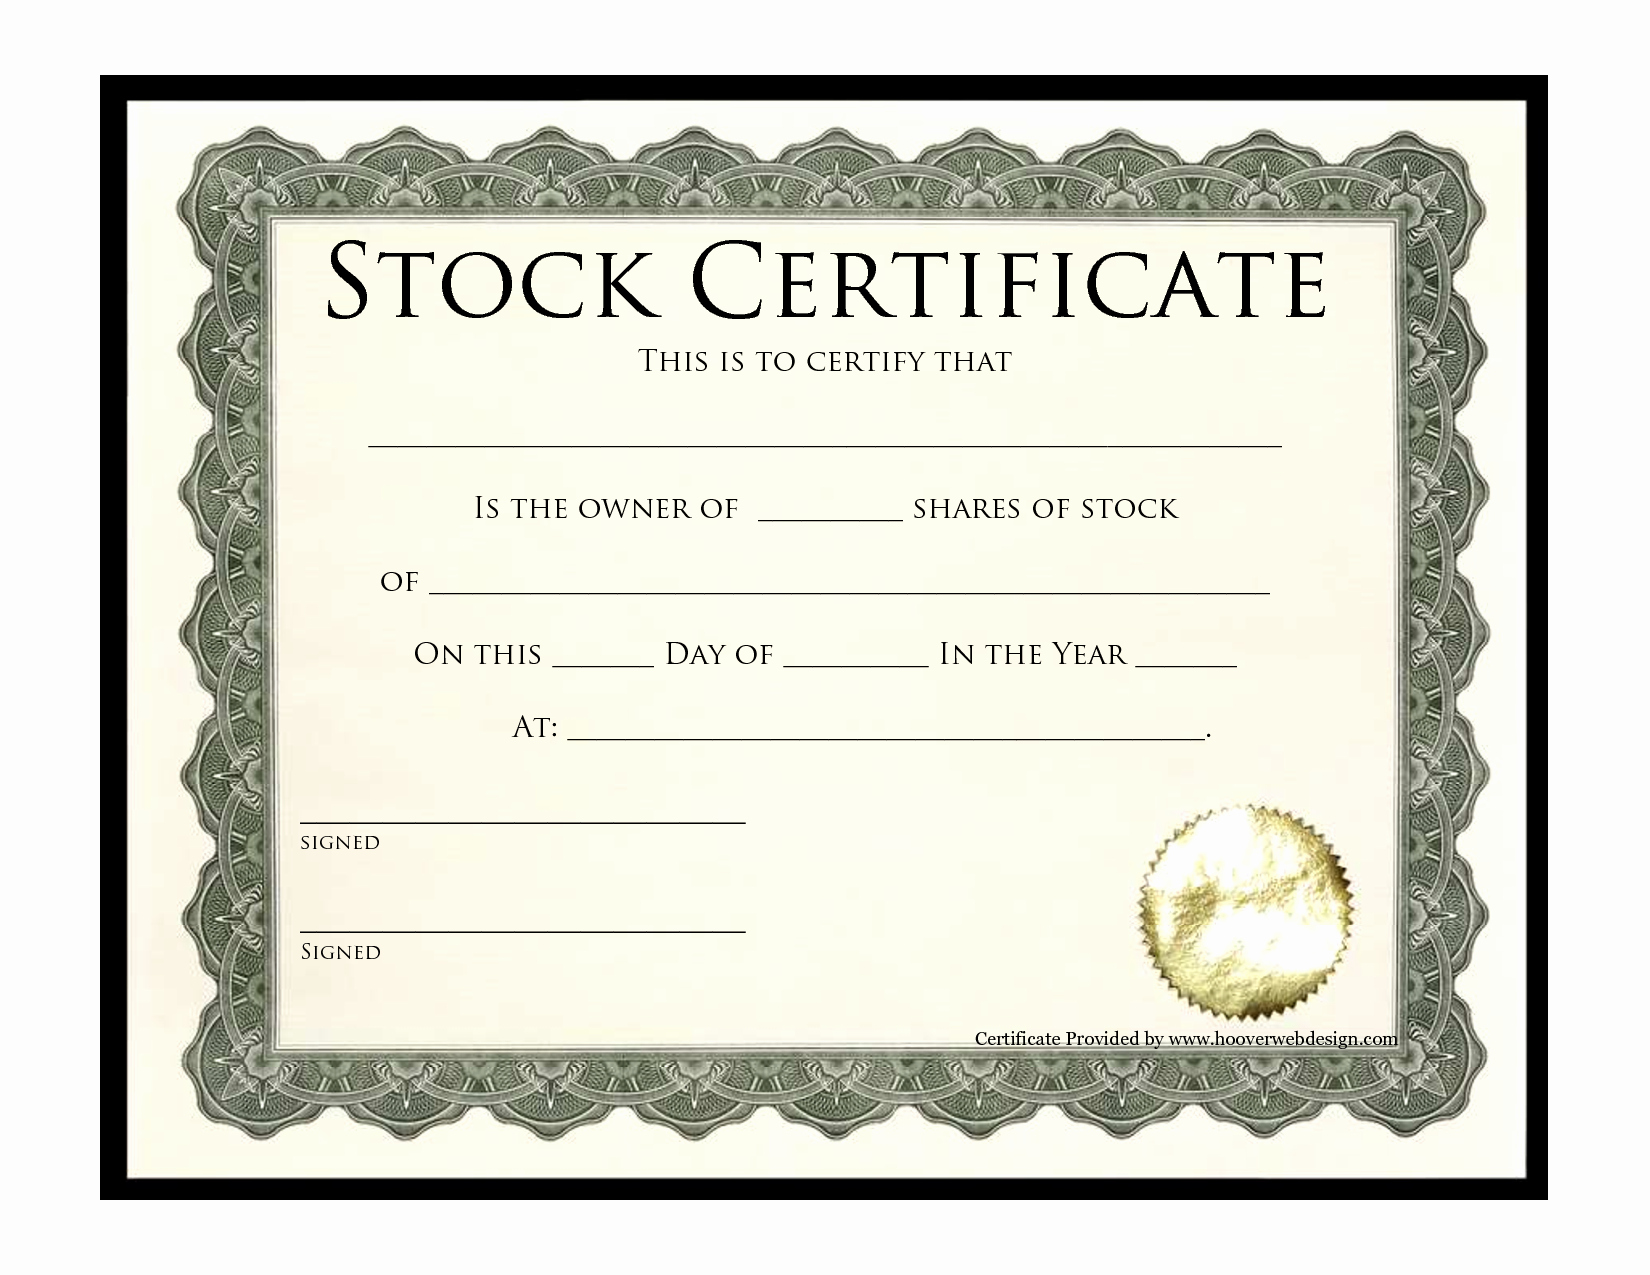 Corporate Stock Certificate Template Awesome Corporation Stock Certificate